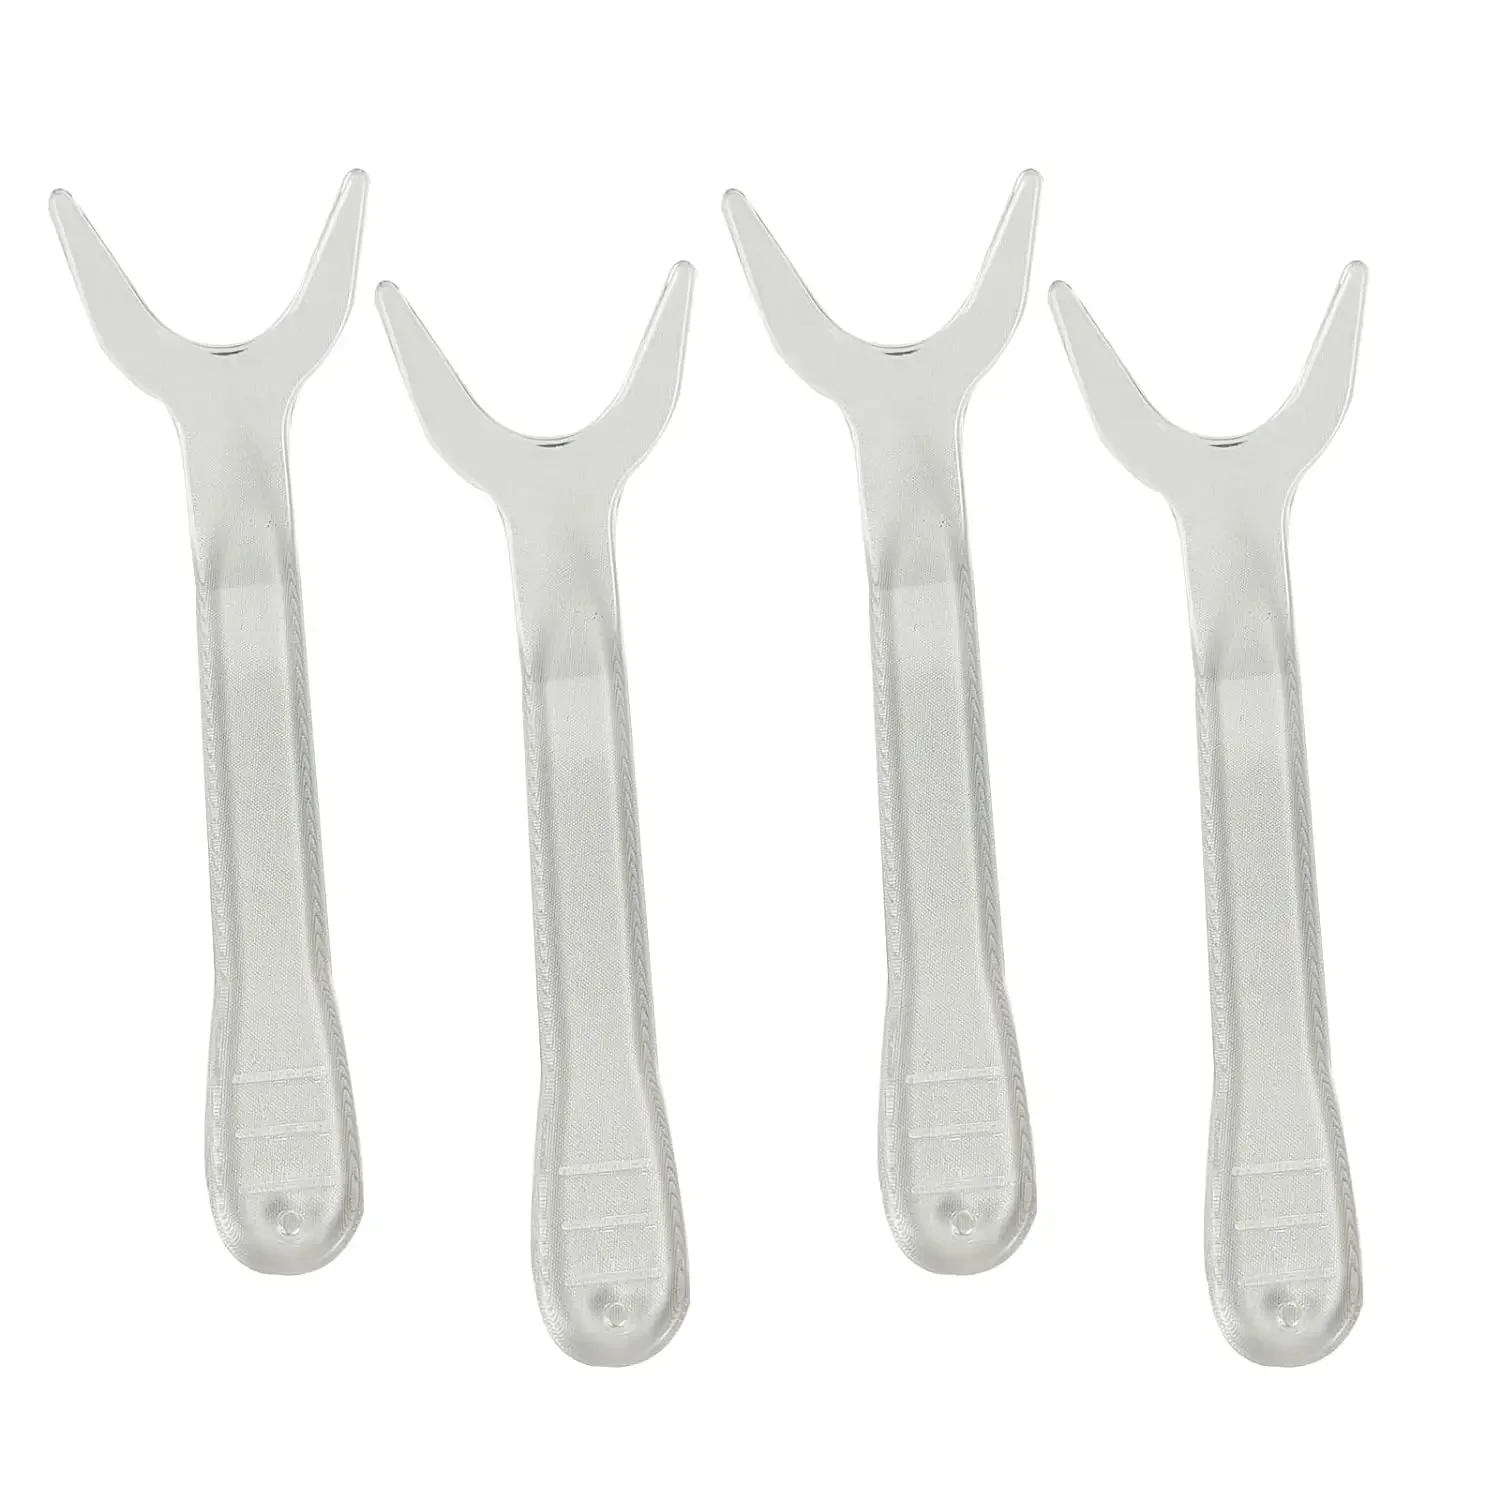 

4pcs Dental Lip Pressure Retractor T-Shape Intraoral Cheek Orthodontic Teeth Mouth Opener for Photography Autoclavable Dentist